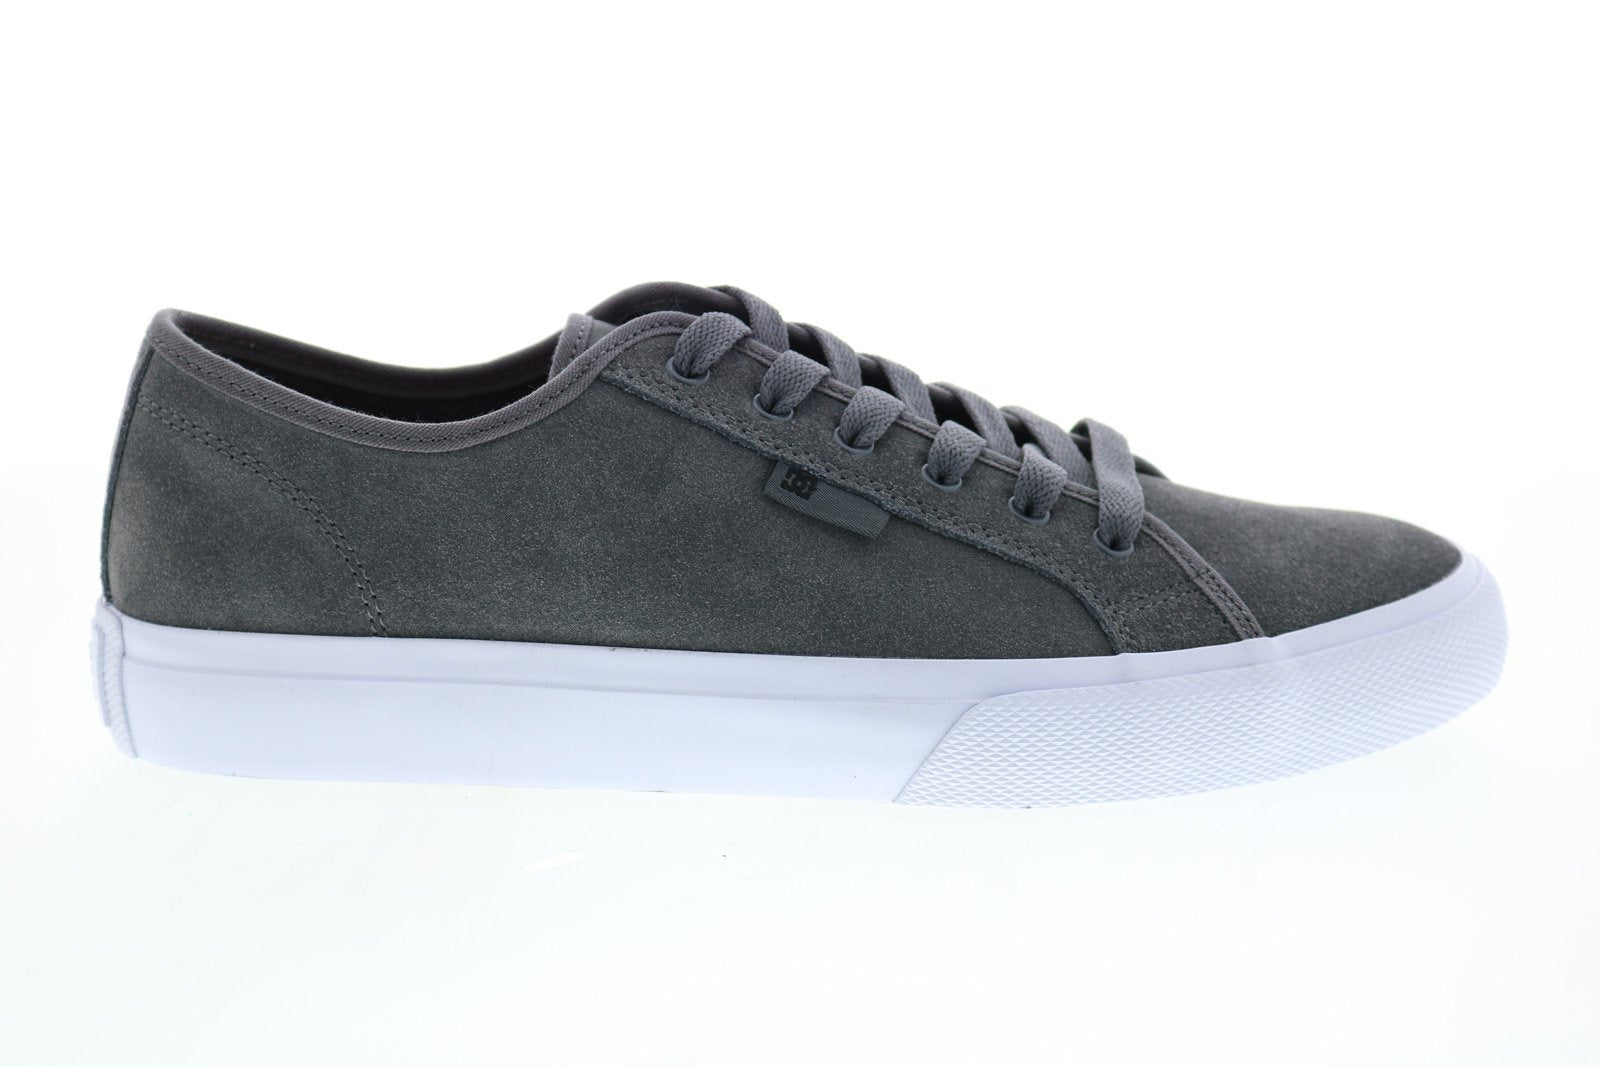 DC Manual S ADYS300637 Mens Gray Suede Skate Inspired Sneakers Shoes ...